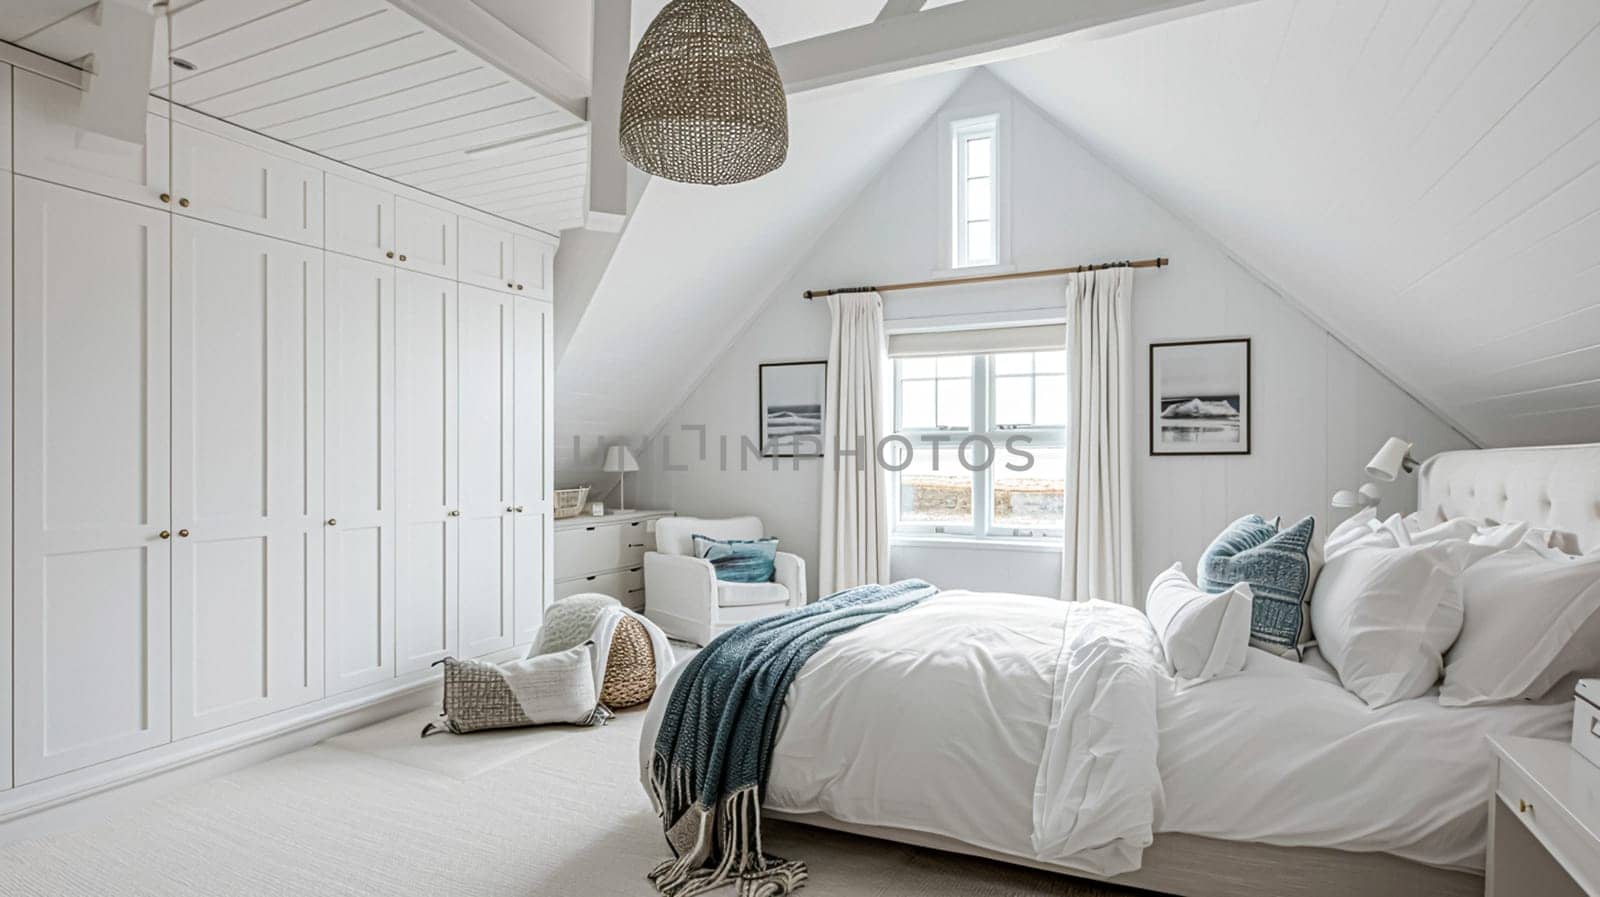 Beautiful interior of luxury bedroom with window sea view. Coastal cottage concept. High quality photo